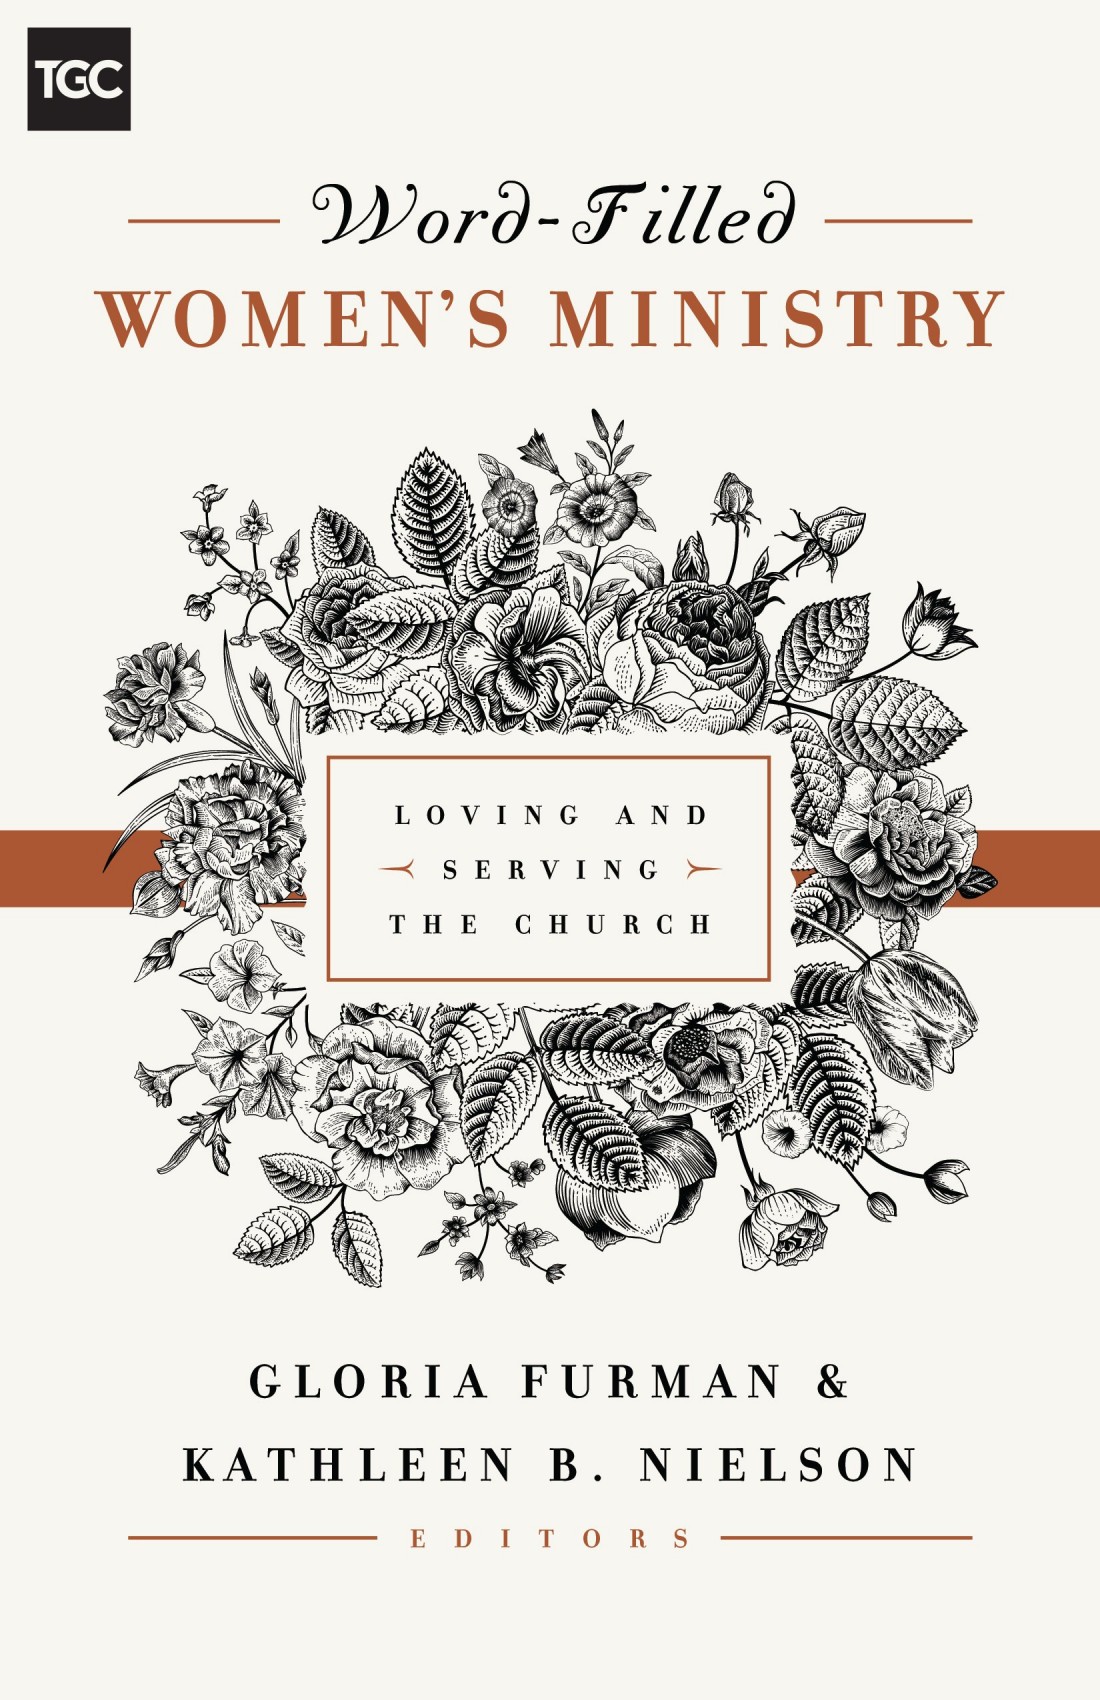 Word-filled womens ministry